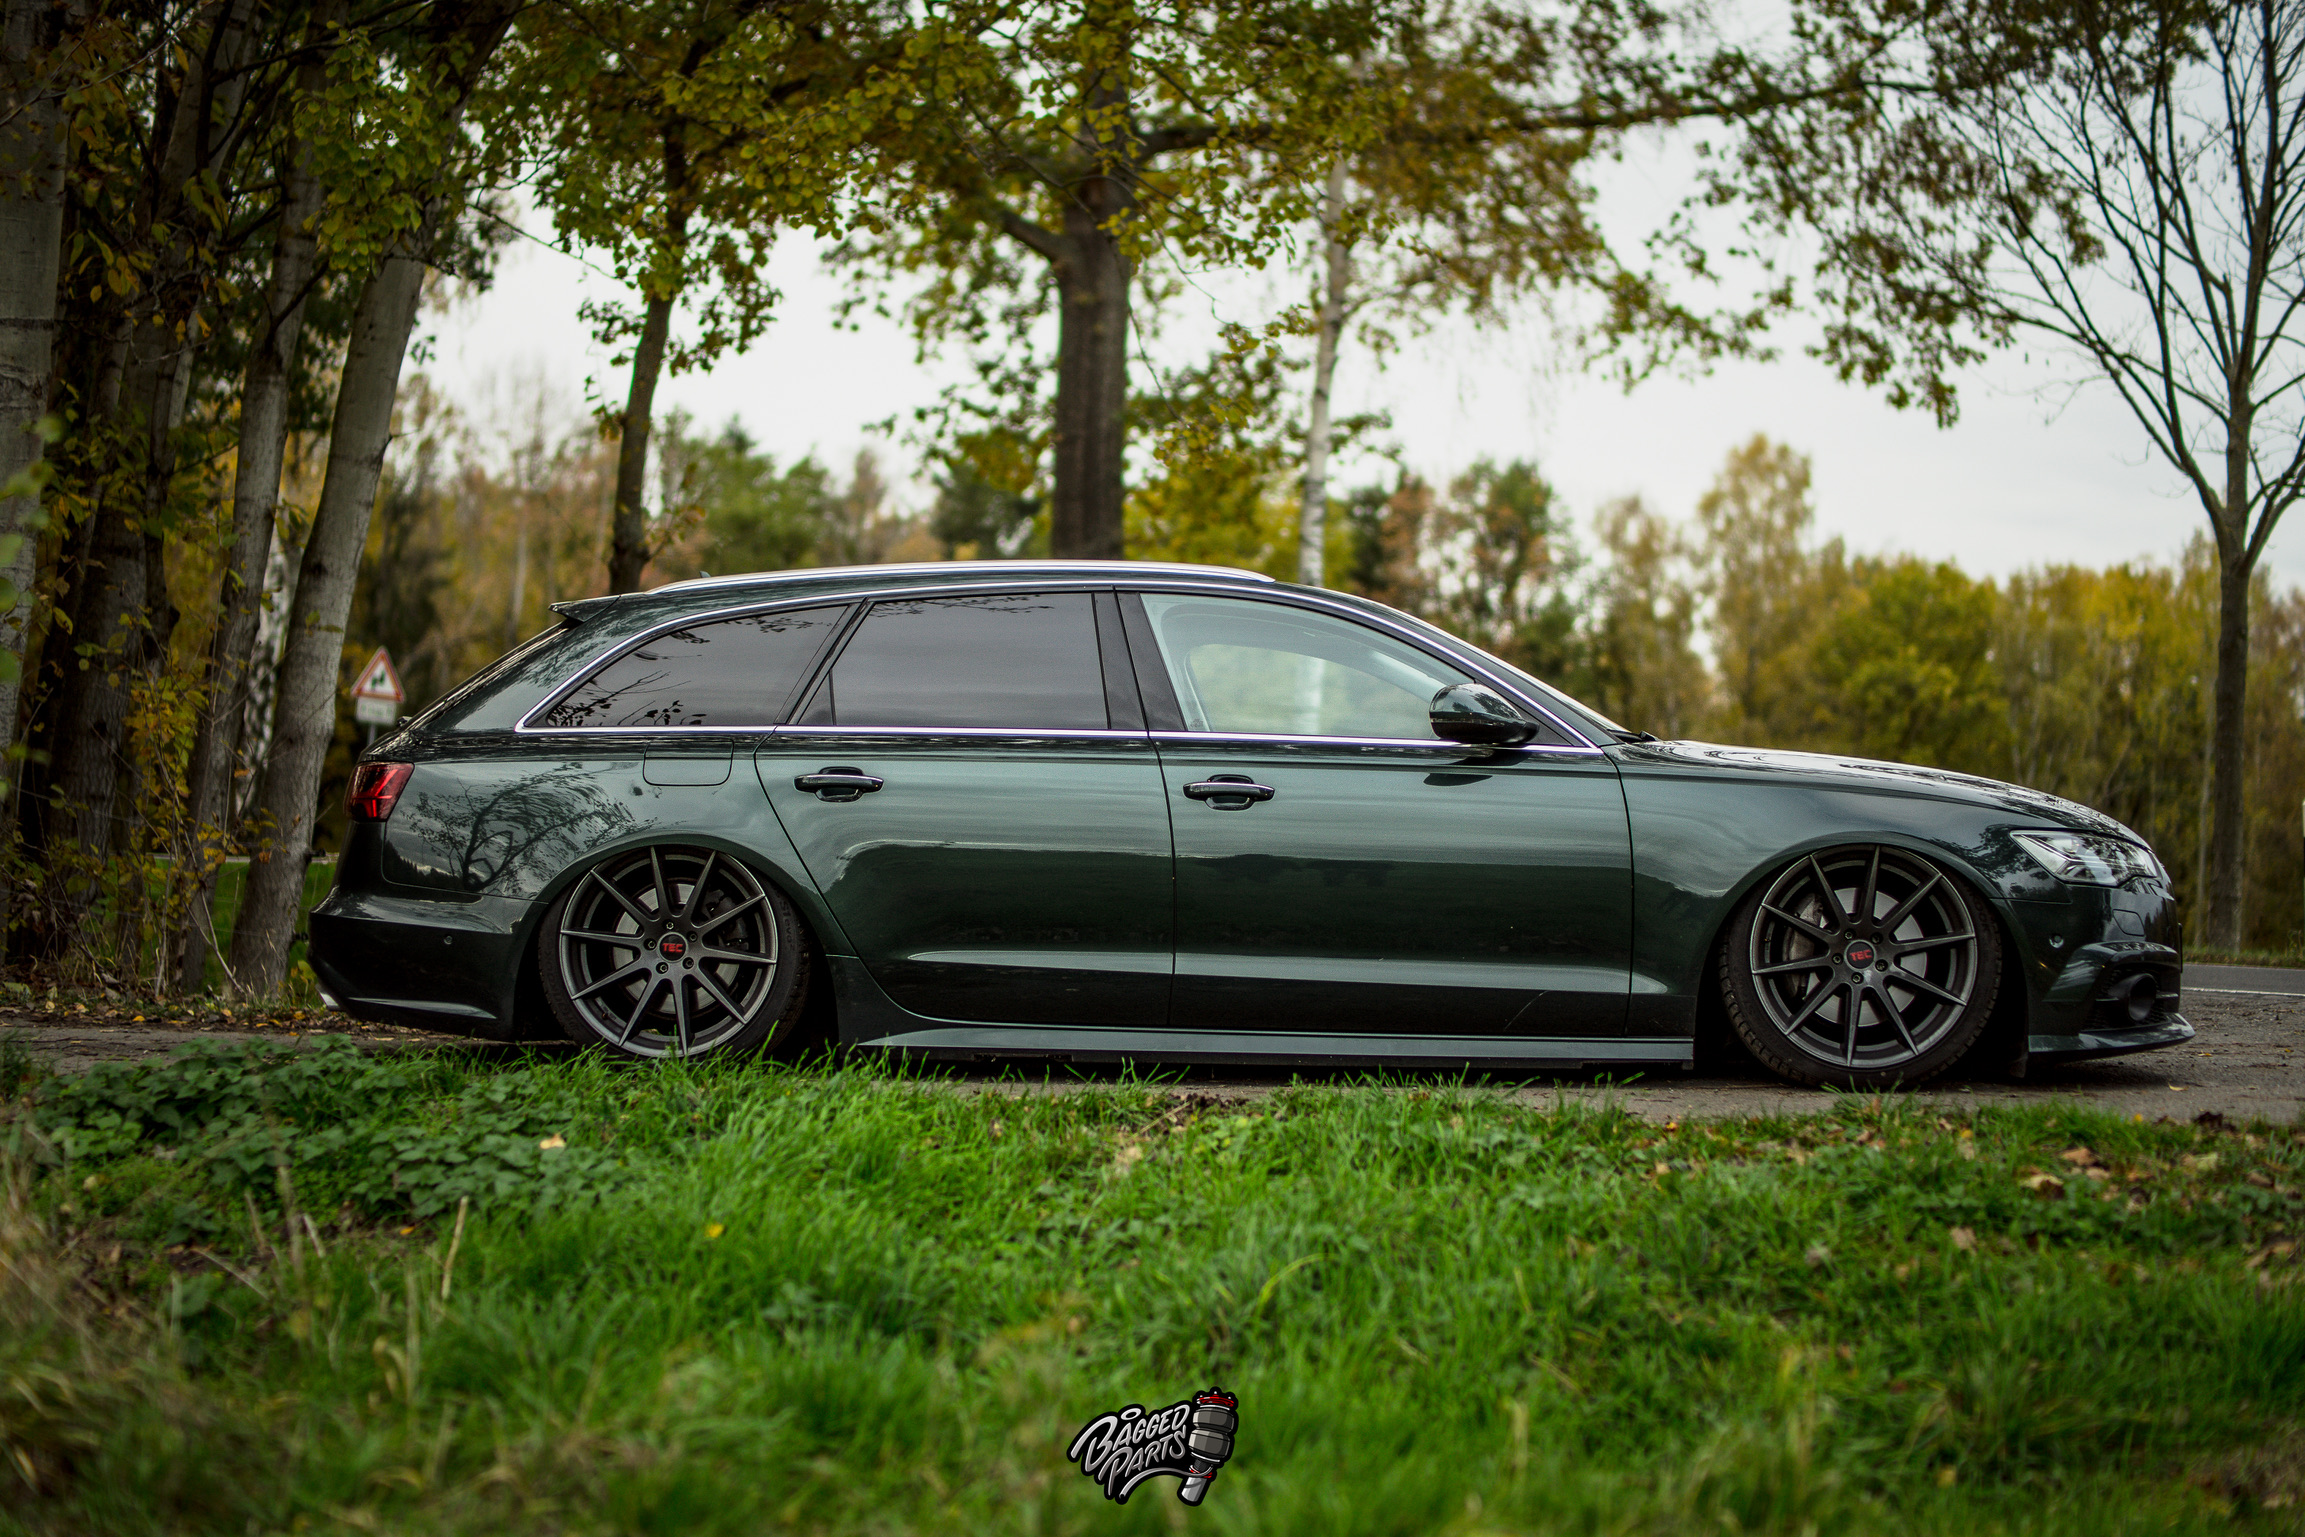 Audi A6 4G  LET THE AIR OUT!